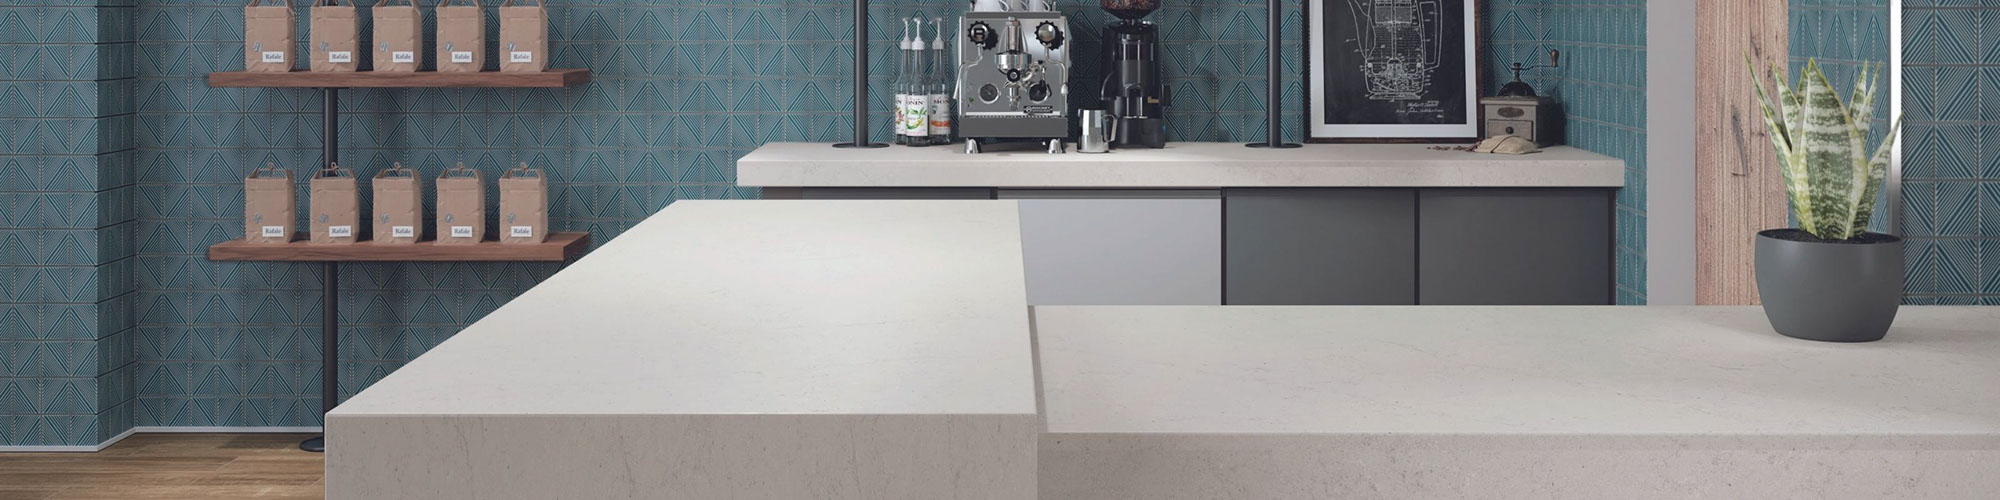 Coffee shop with off-white stone look quartz countertops, textured blue diamond-shaped wall tile, floating shelves holding cups and bags of coffee.